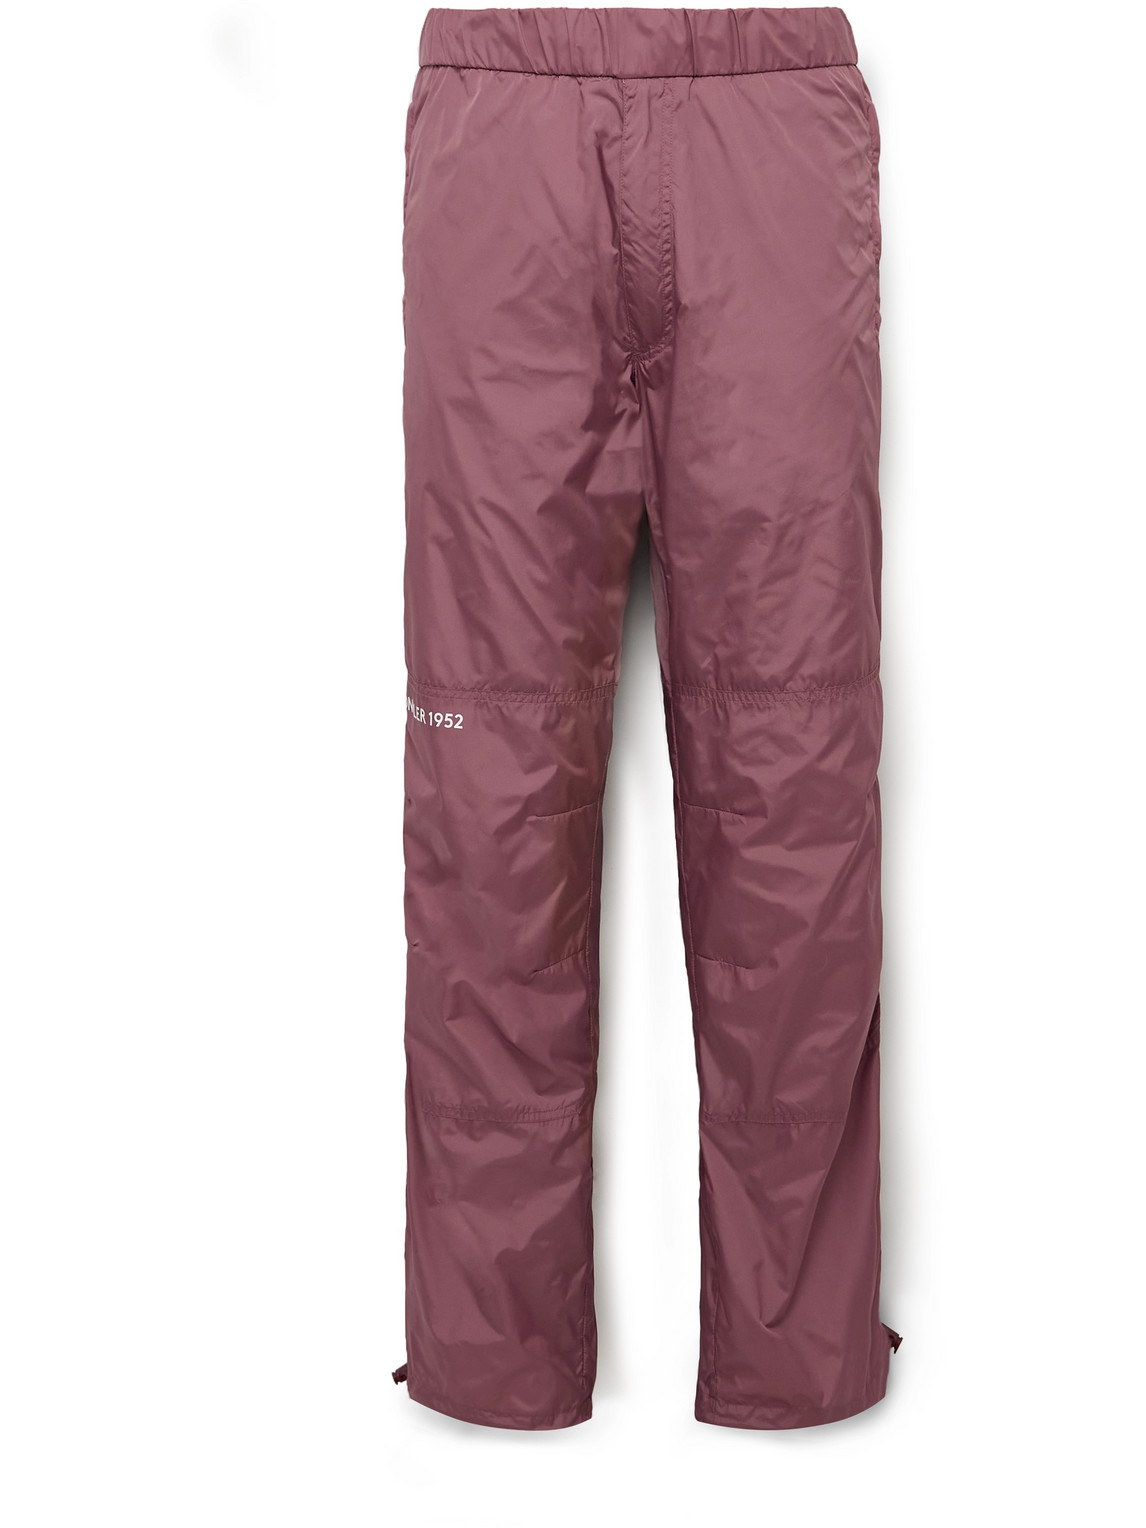 Moncler Genius 2 Moncler 1952 Tapered Logo-Print Shell Trousers